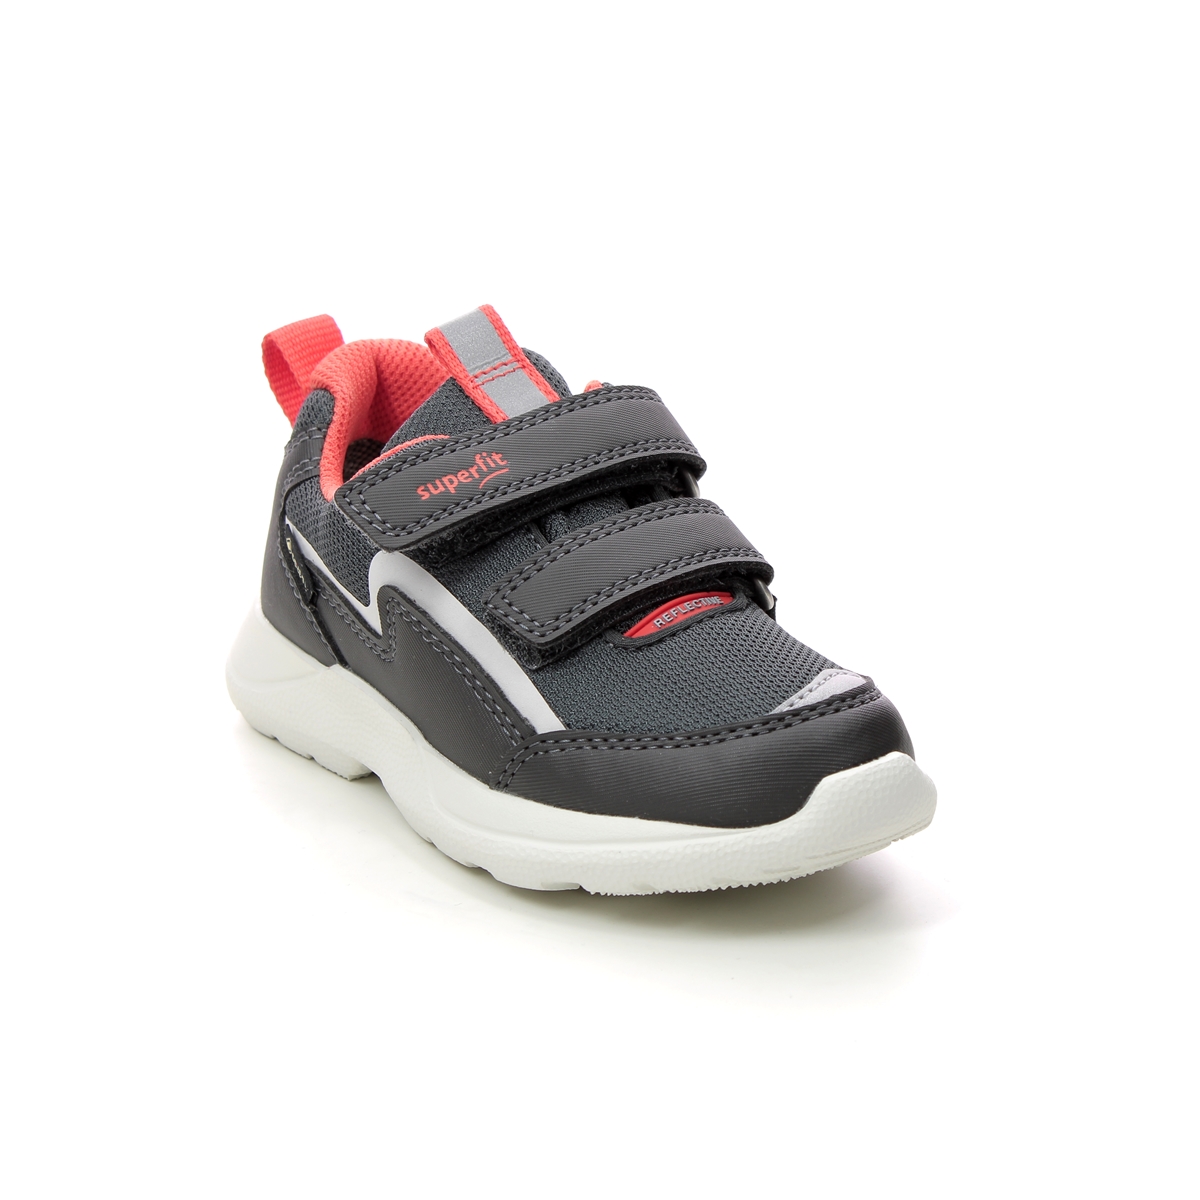 Superfit Rush Mini Gtx Black Red Kids Trainers 1006212-2000 In Size 24 In Plain Black Red For kids